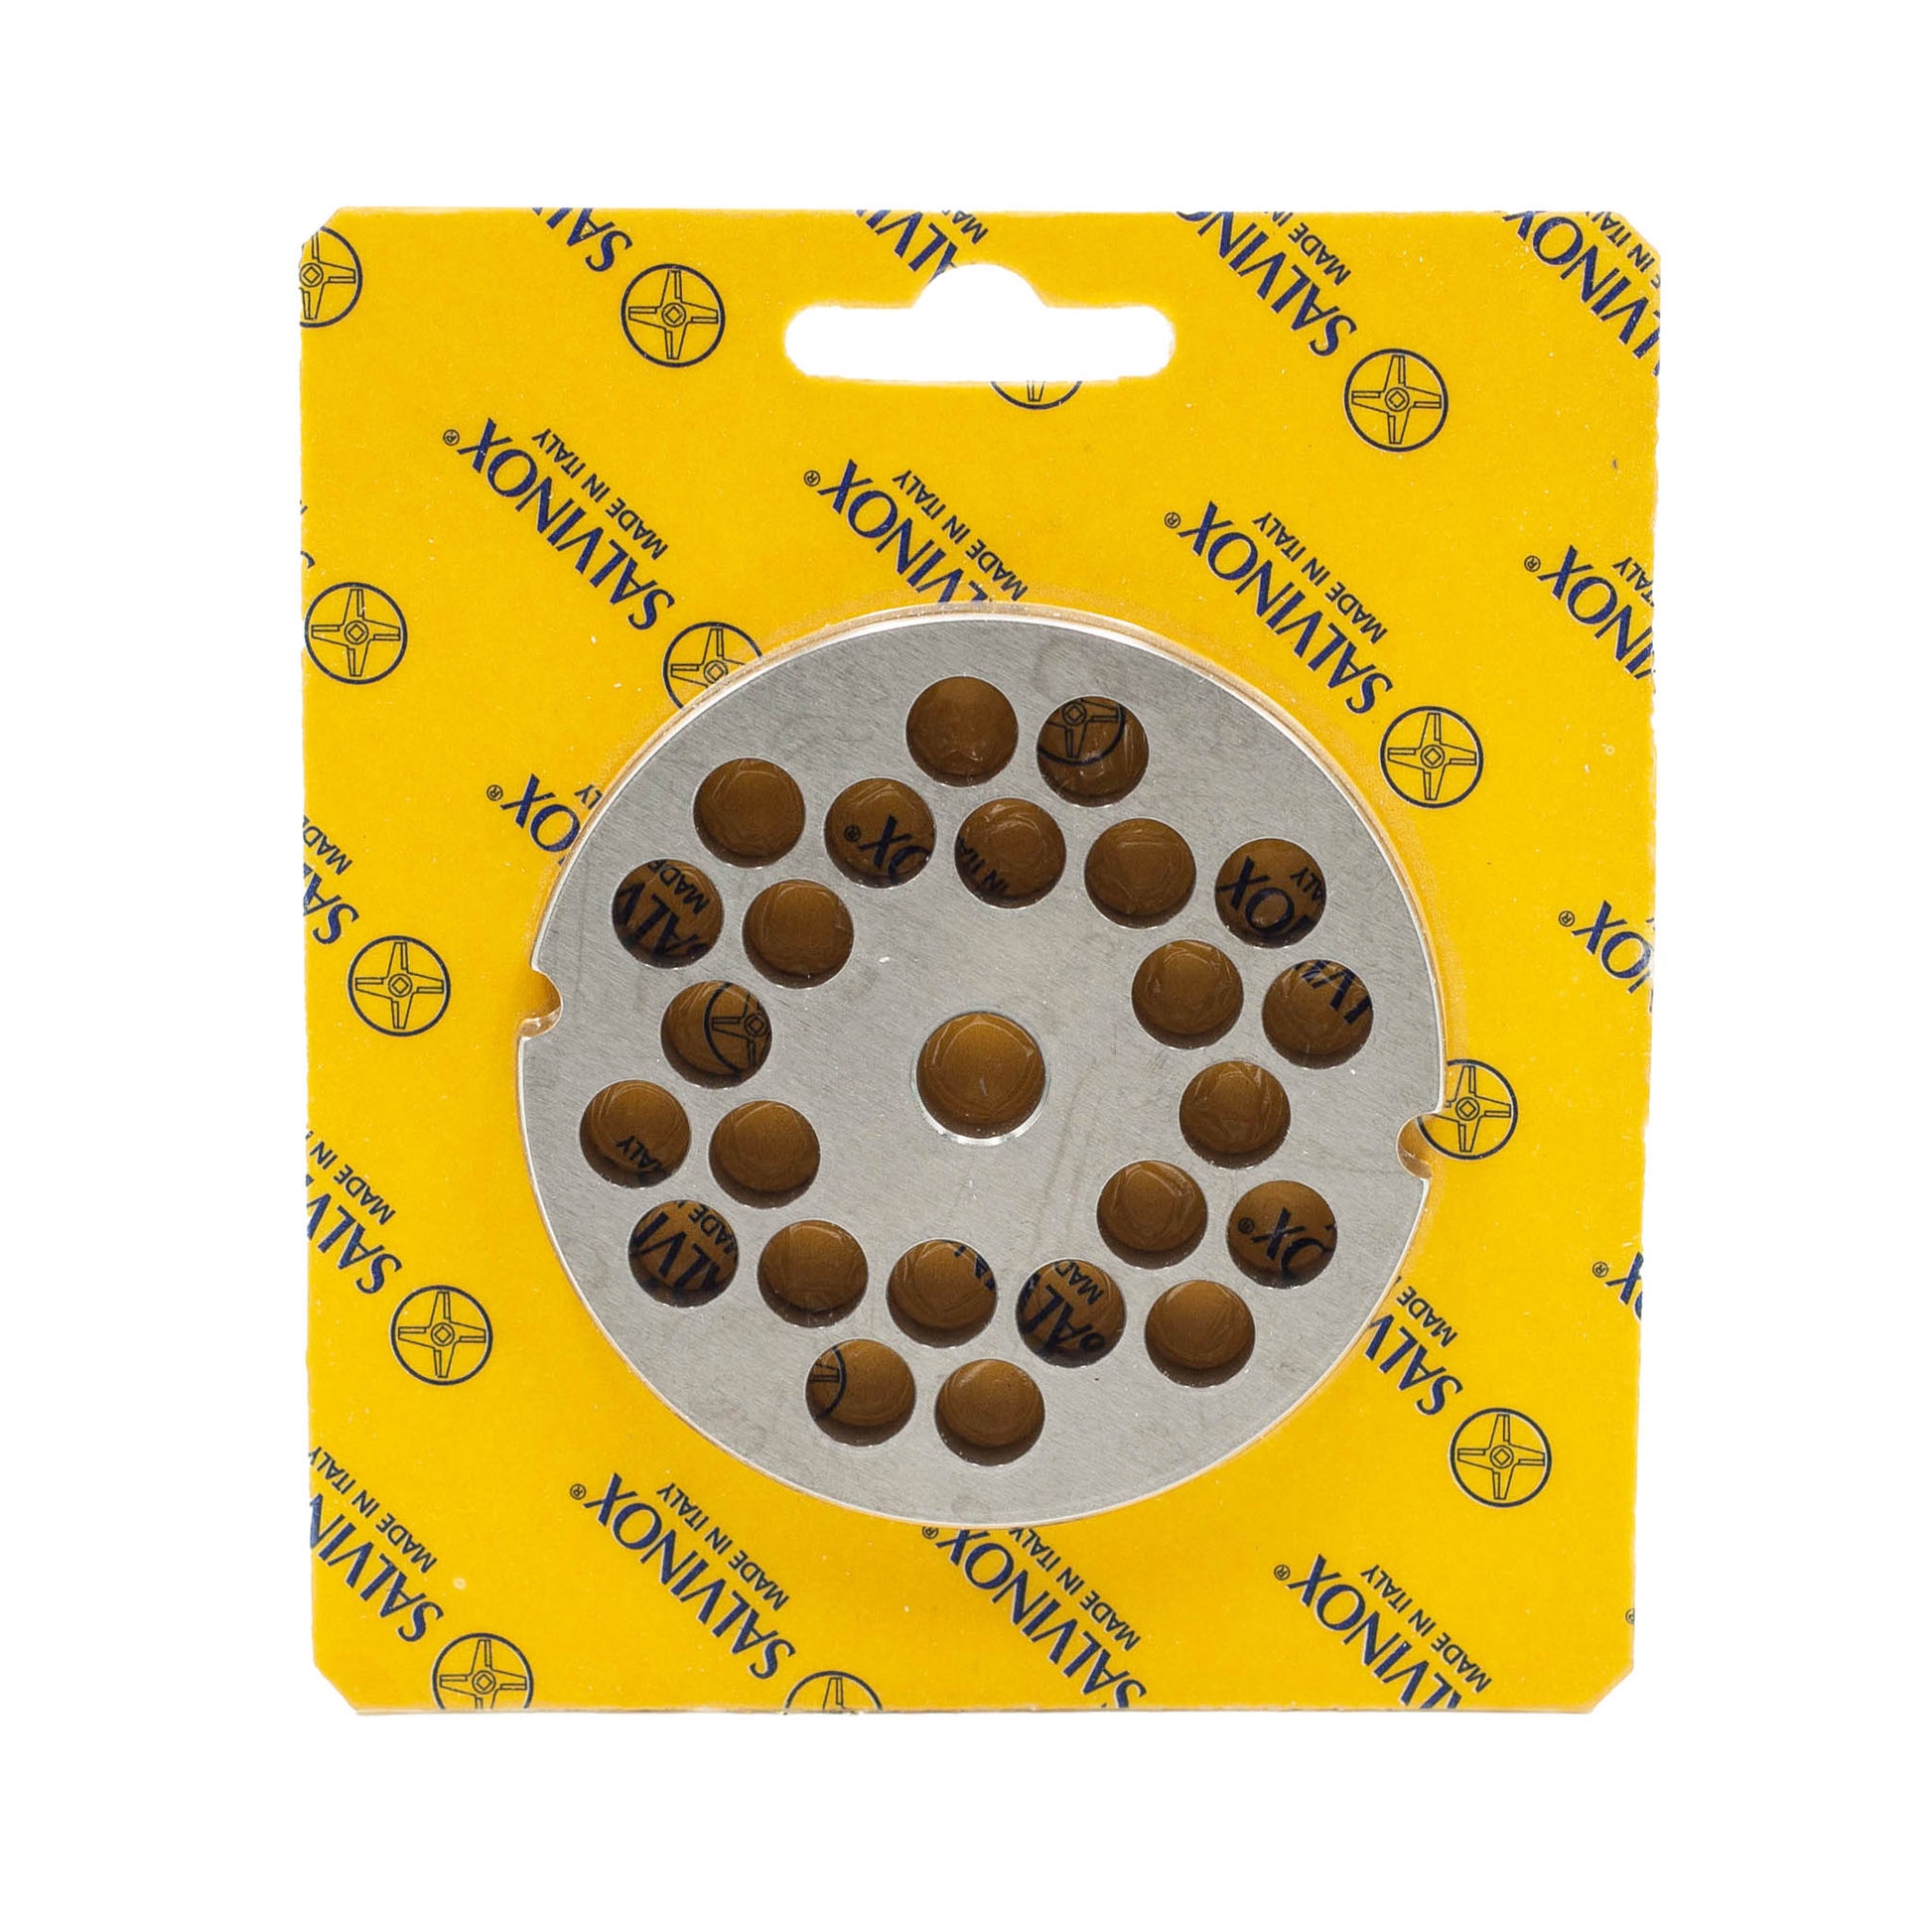 size 22 with 10mm holes stainless steel replacement mincer plate for salami and sausage mincing machines. 